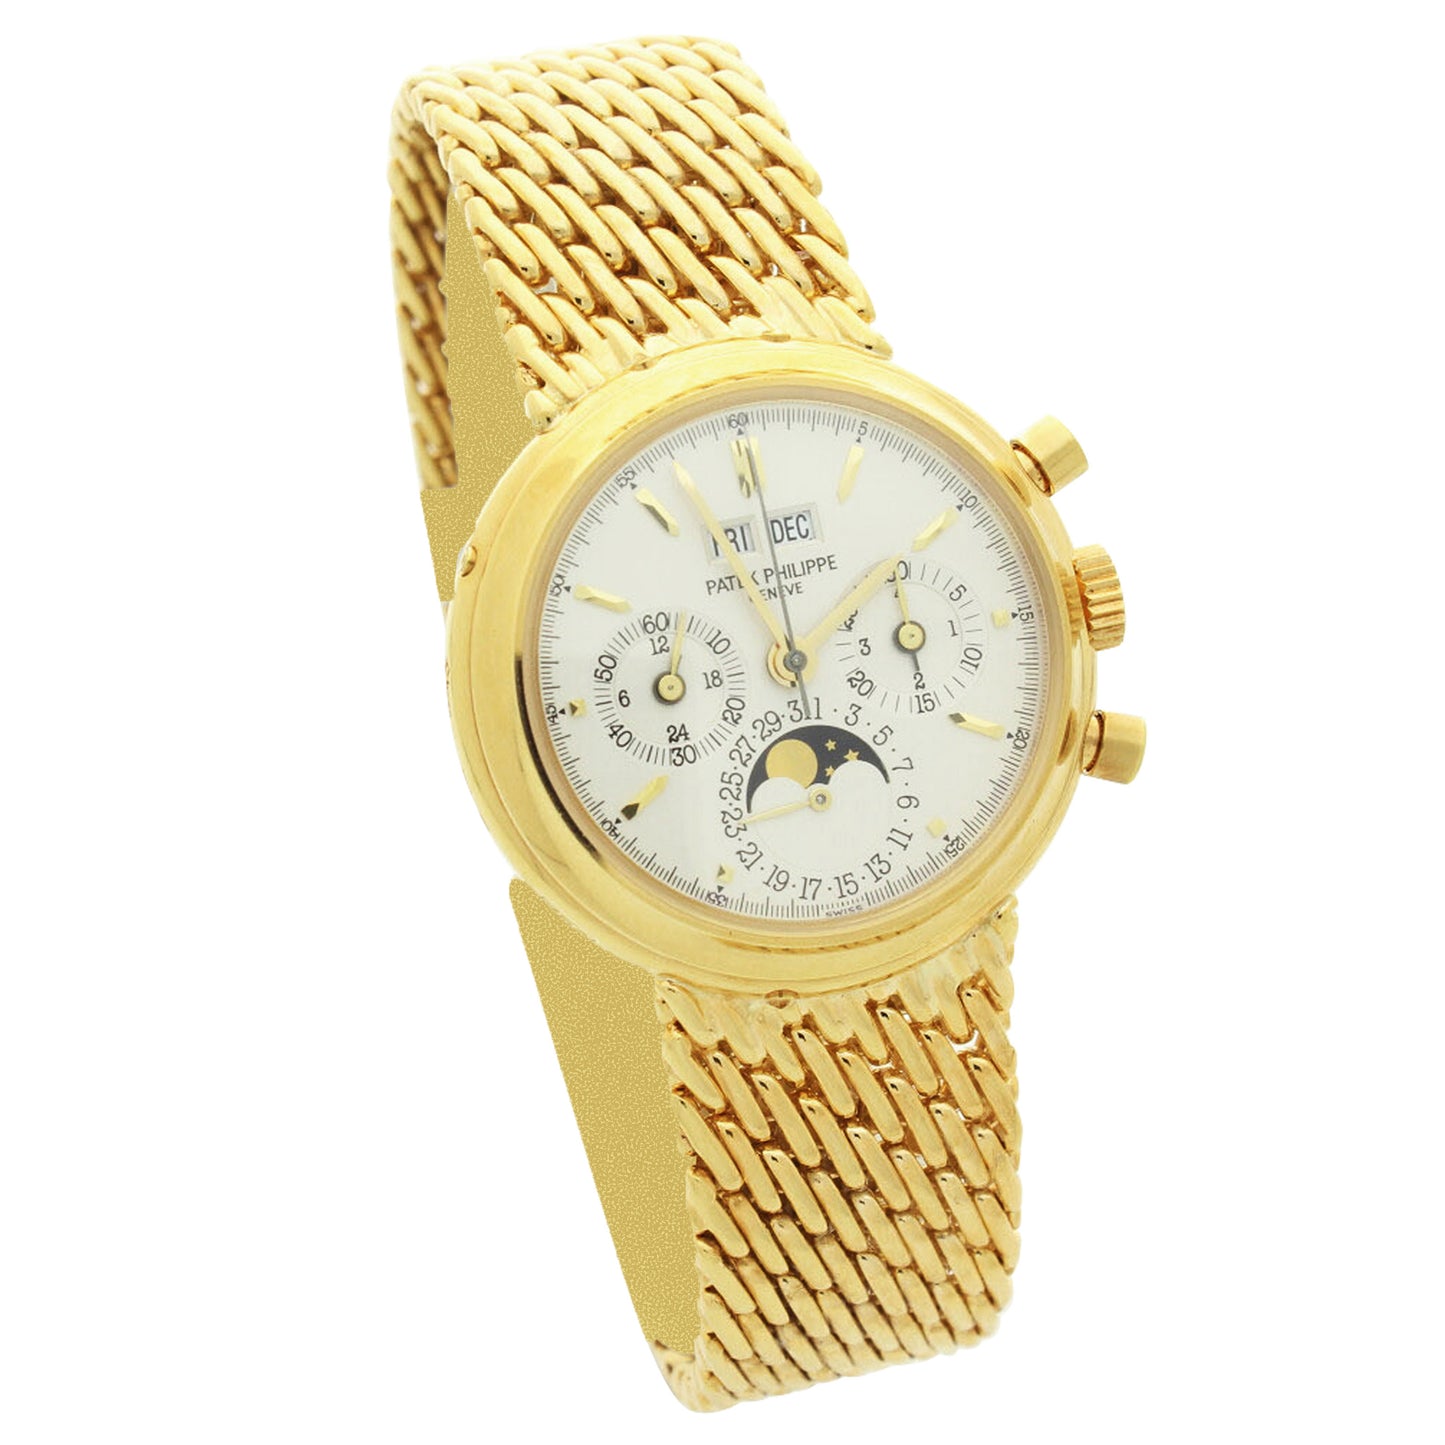 18ct yellow gold, reference 3970 perpetual calendar chronograph bracelet watch. Made 2002